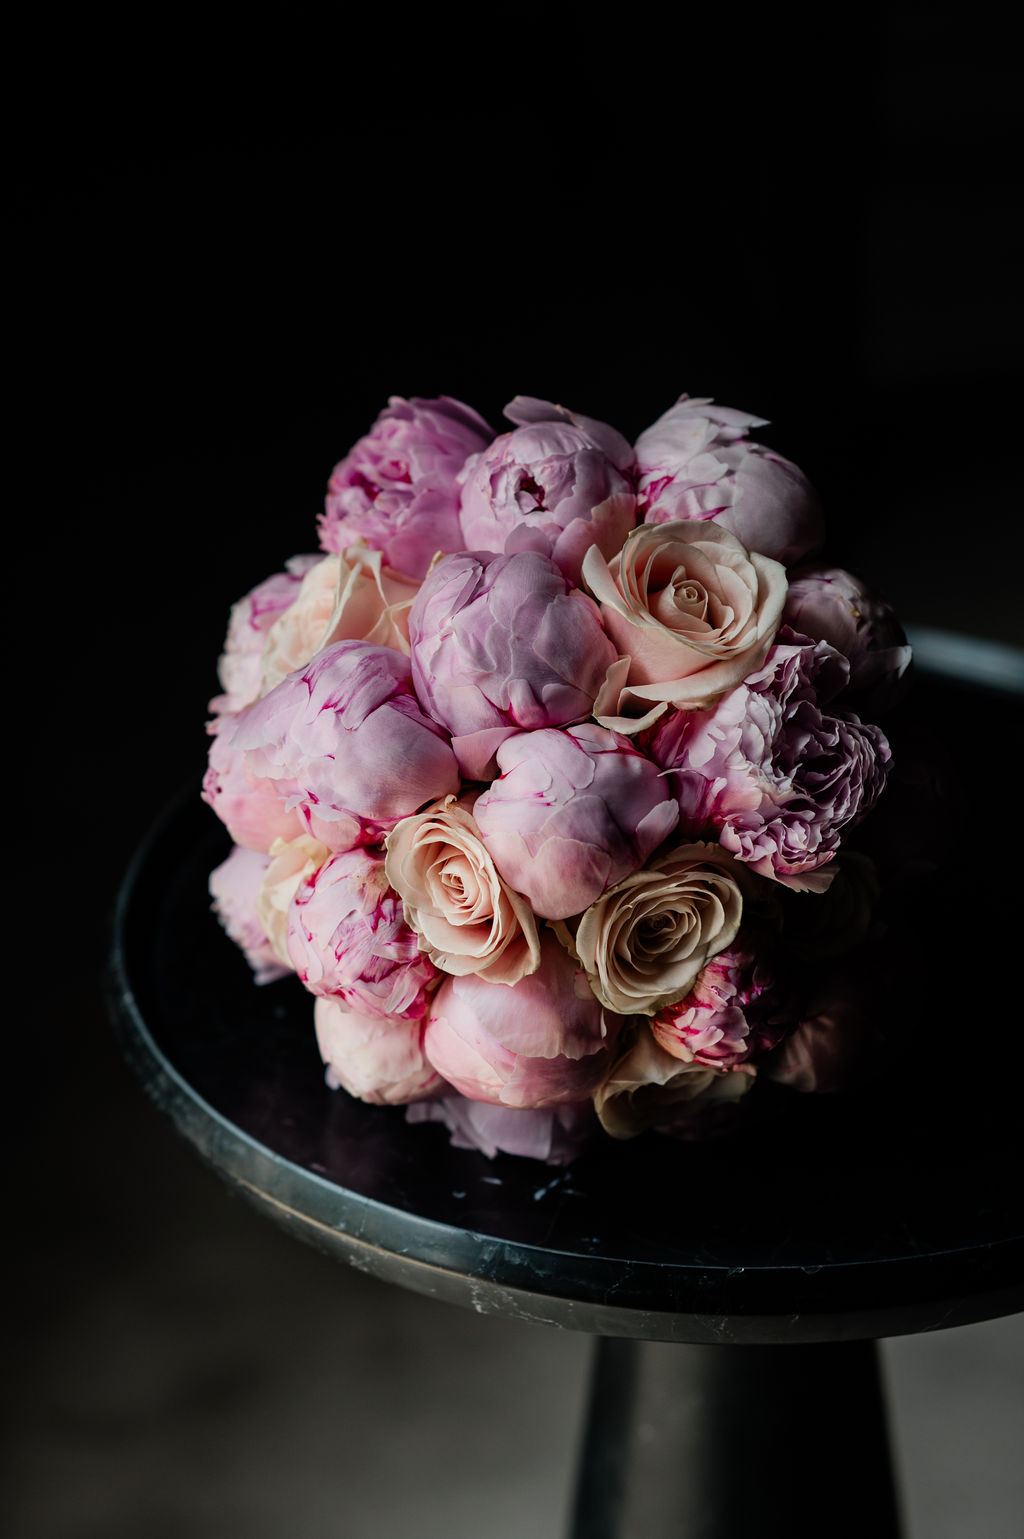 Peony and rose bouquet on a dark table with a black background